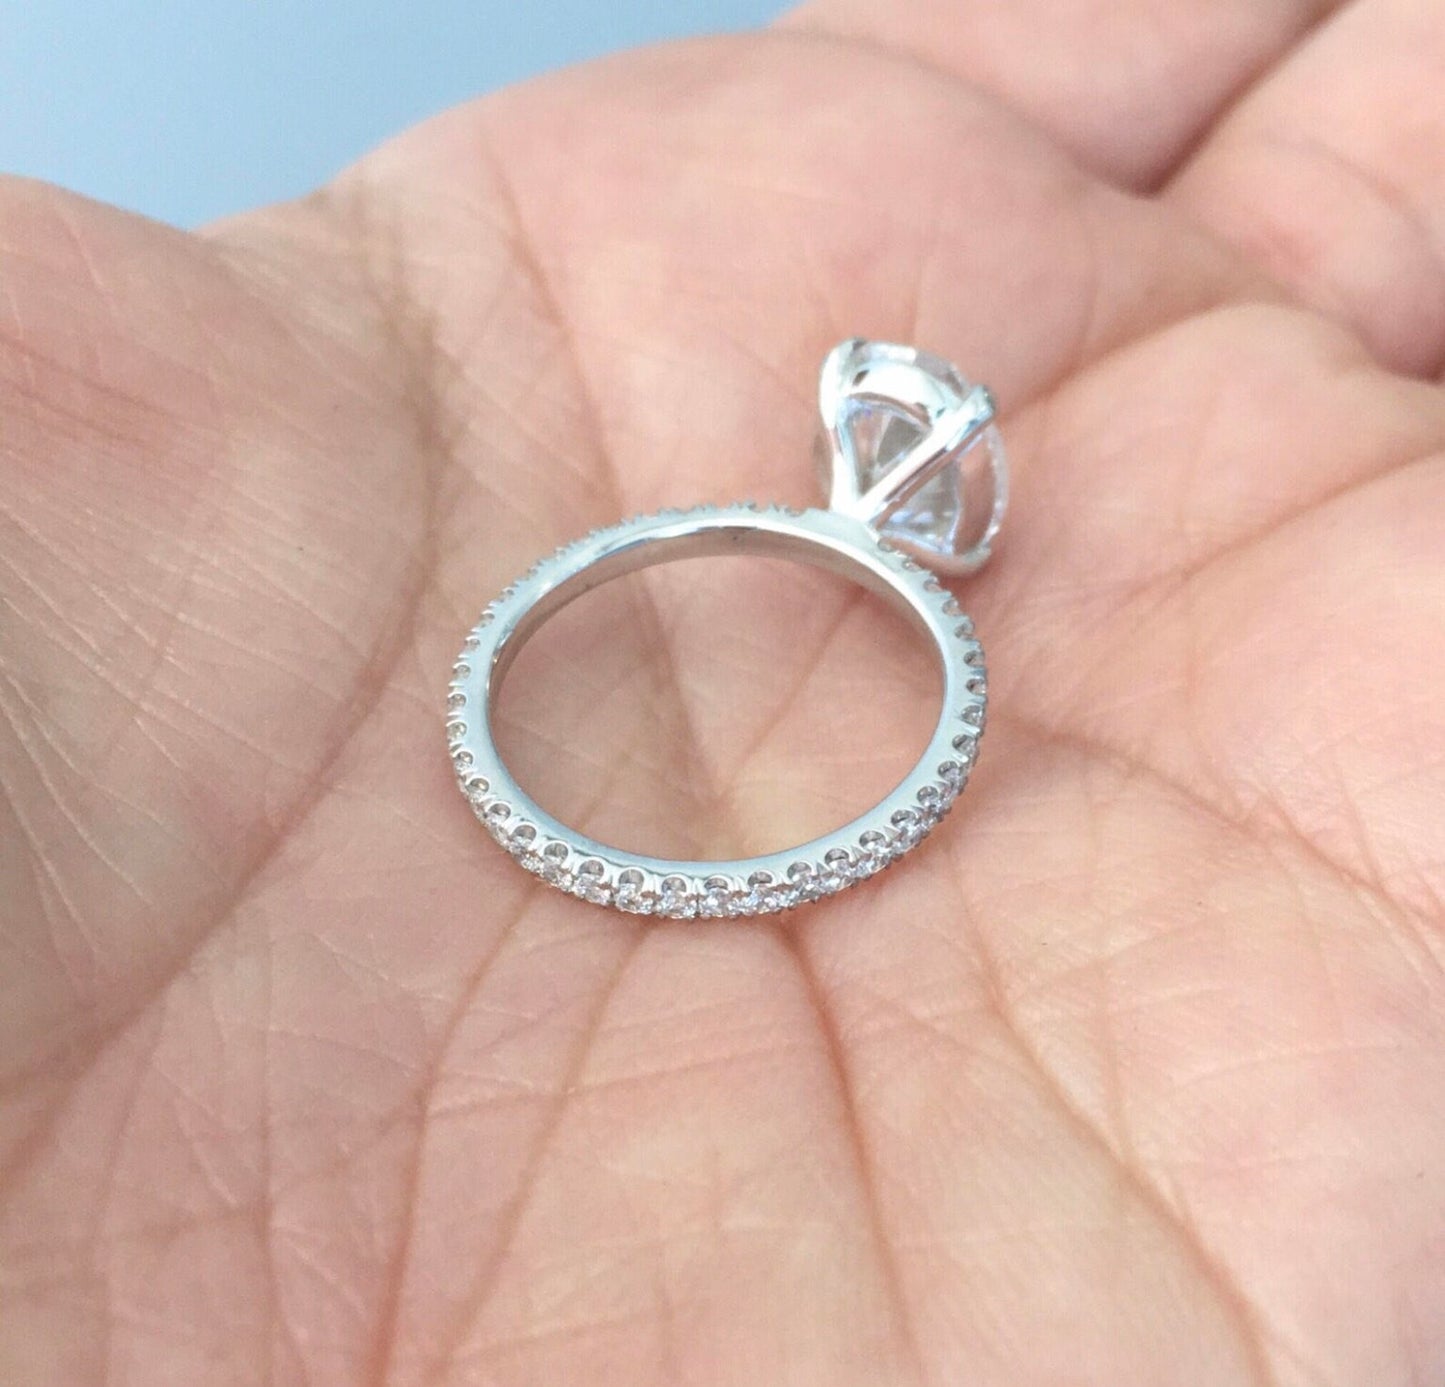 Reserved for Ryan ONLY/ 14K White Gold Solitaire Ring/ 1.5ct Oval Moissanite Ring with Natural Diamonds Pave Set All the Way Around